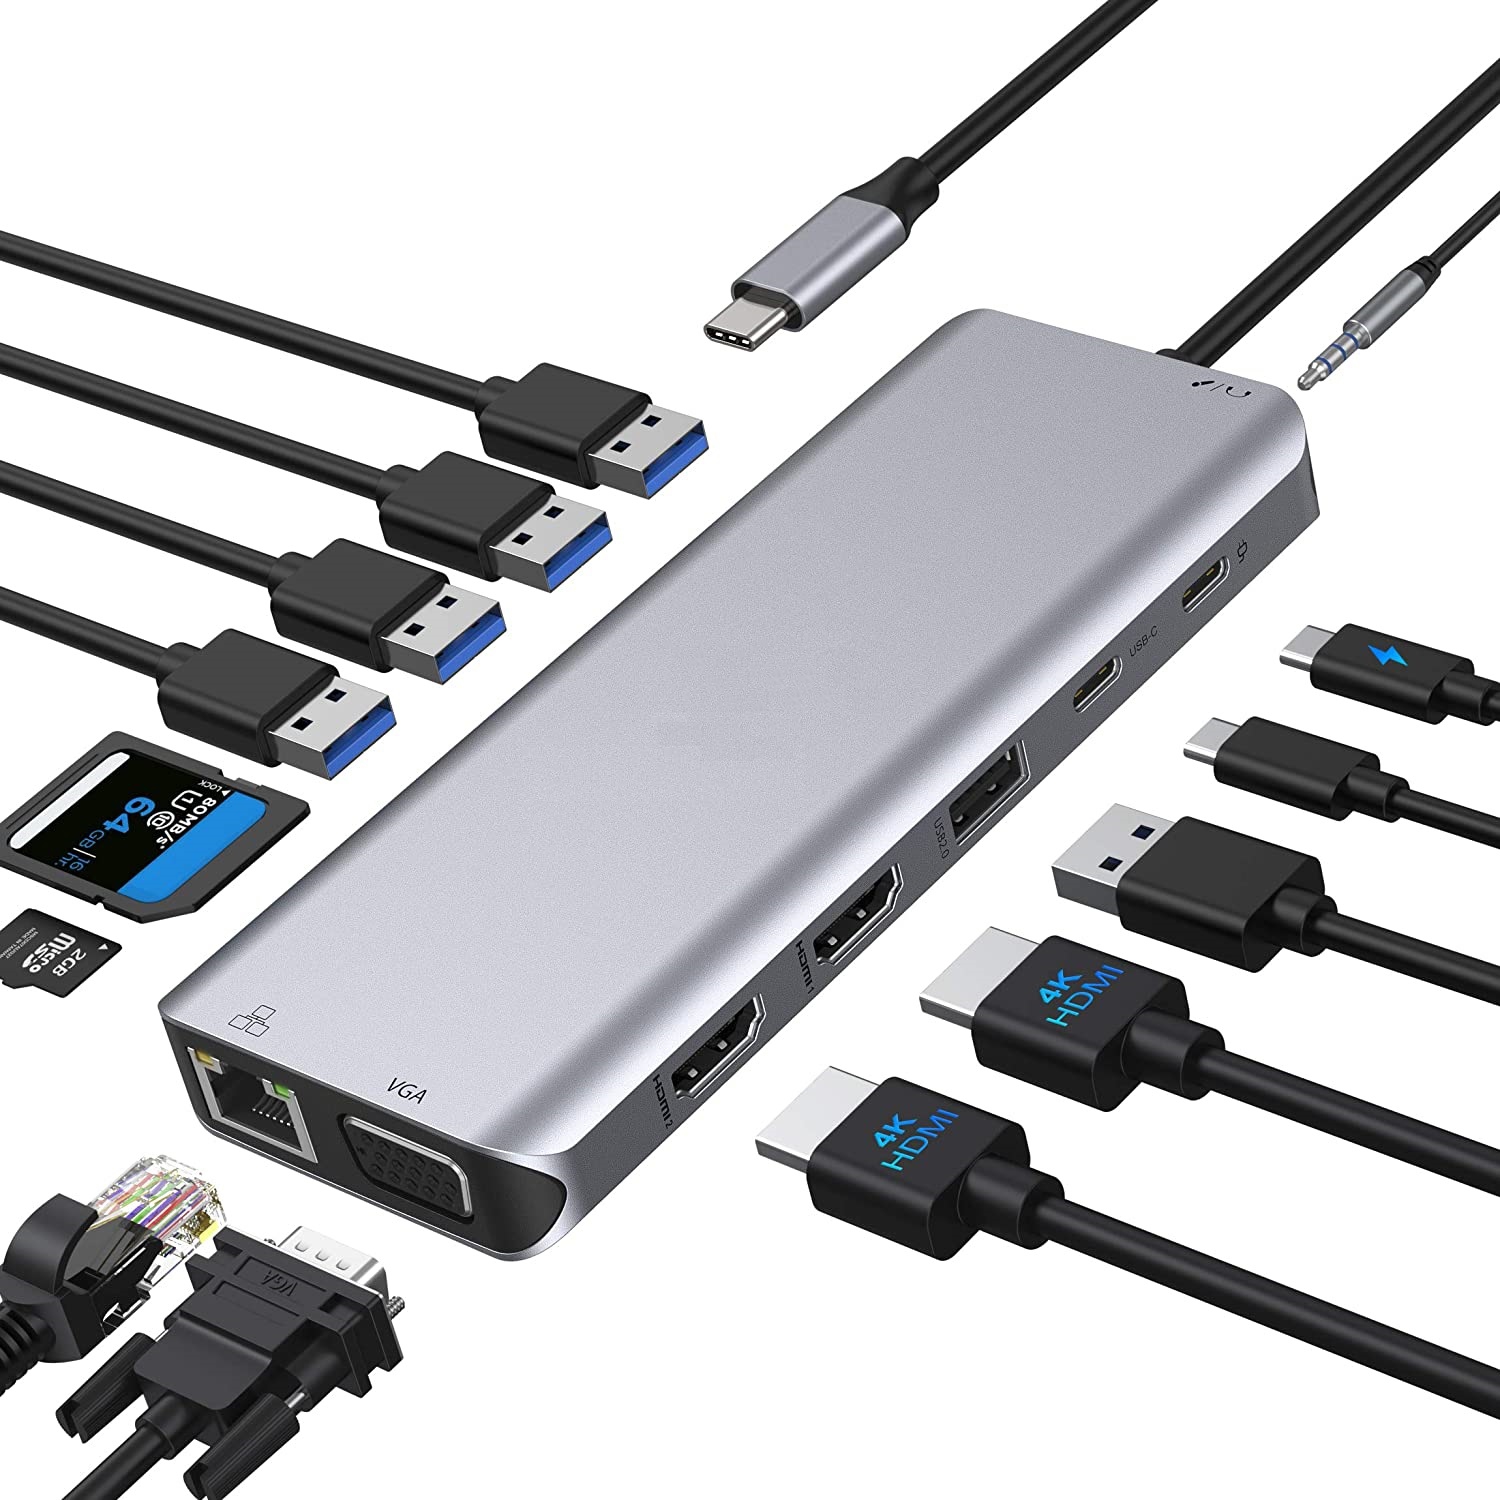 14 in 1 USB C Hub and Docking Station with Two 4K HDMI ,Ethernet, VGA, 4xUSB 3.0, 1xUSB 2.0 & SD Card Reader Compatible With Thunderbolt 3 and Type C